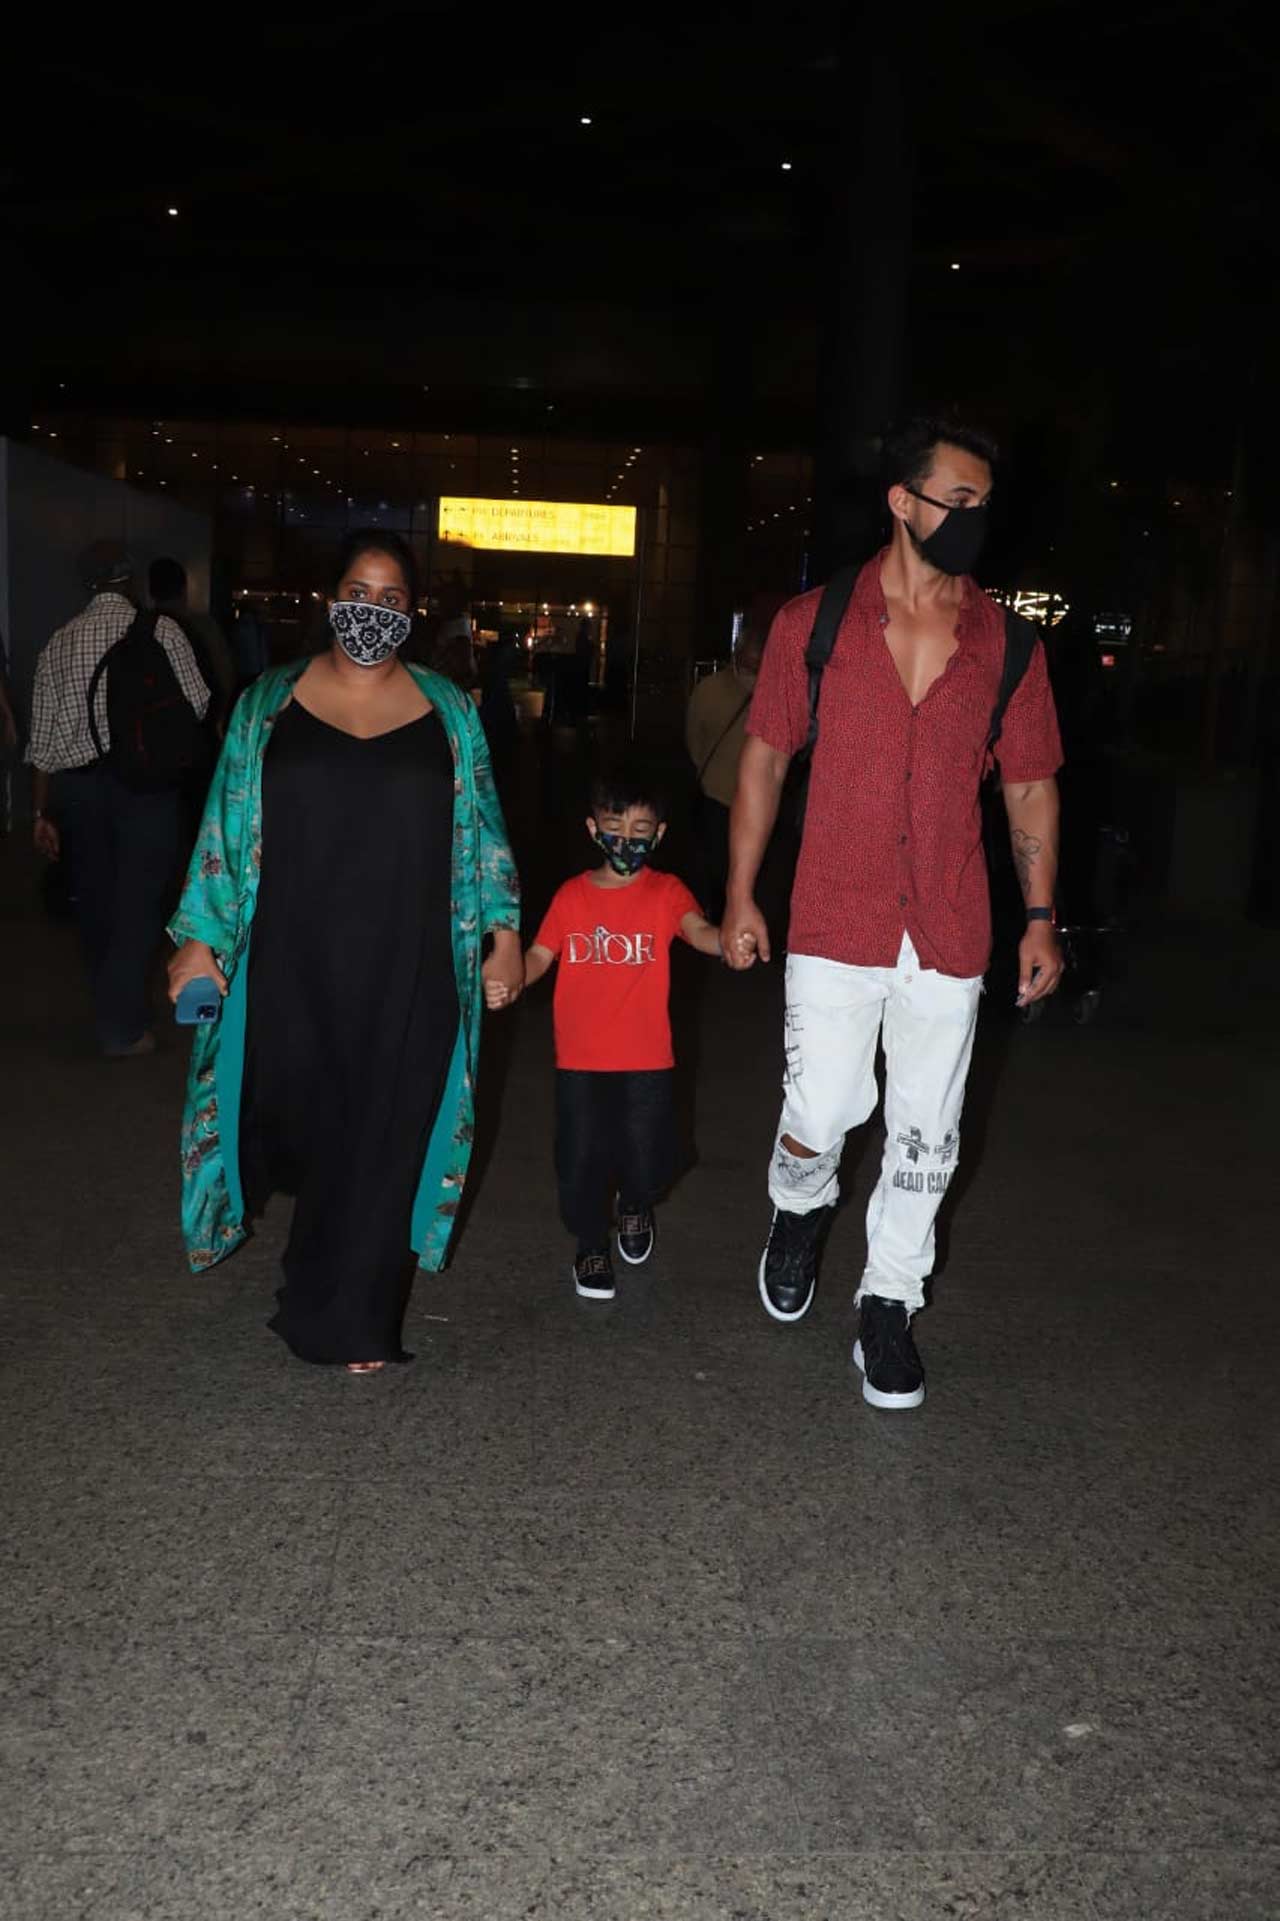 Aayush Sharma was snapped with his wife Arpita Khan Sharma, son Ahil at the Mumbai airport. The actor, who will be next seen in Antim: The Final Truth, as an antagonist, opted for a casual shirt, paired with basic denim as his airport look.